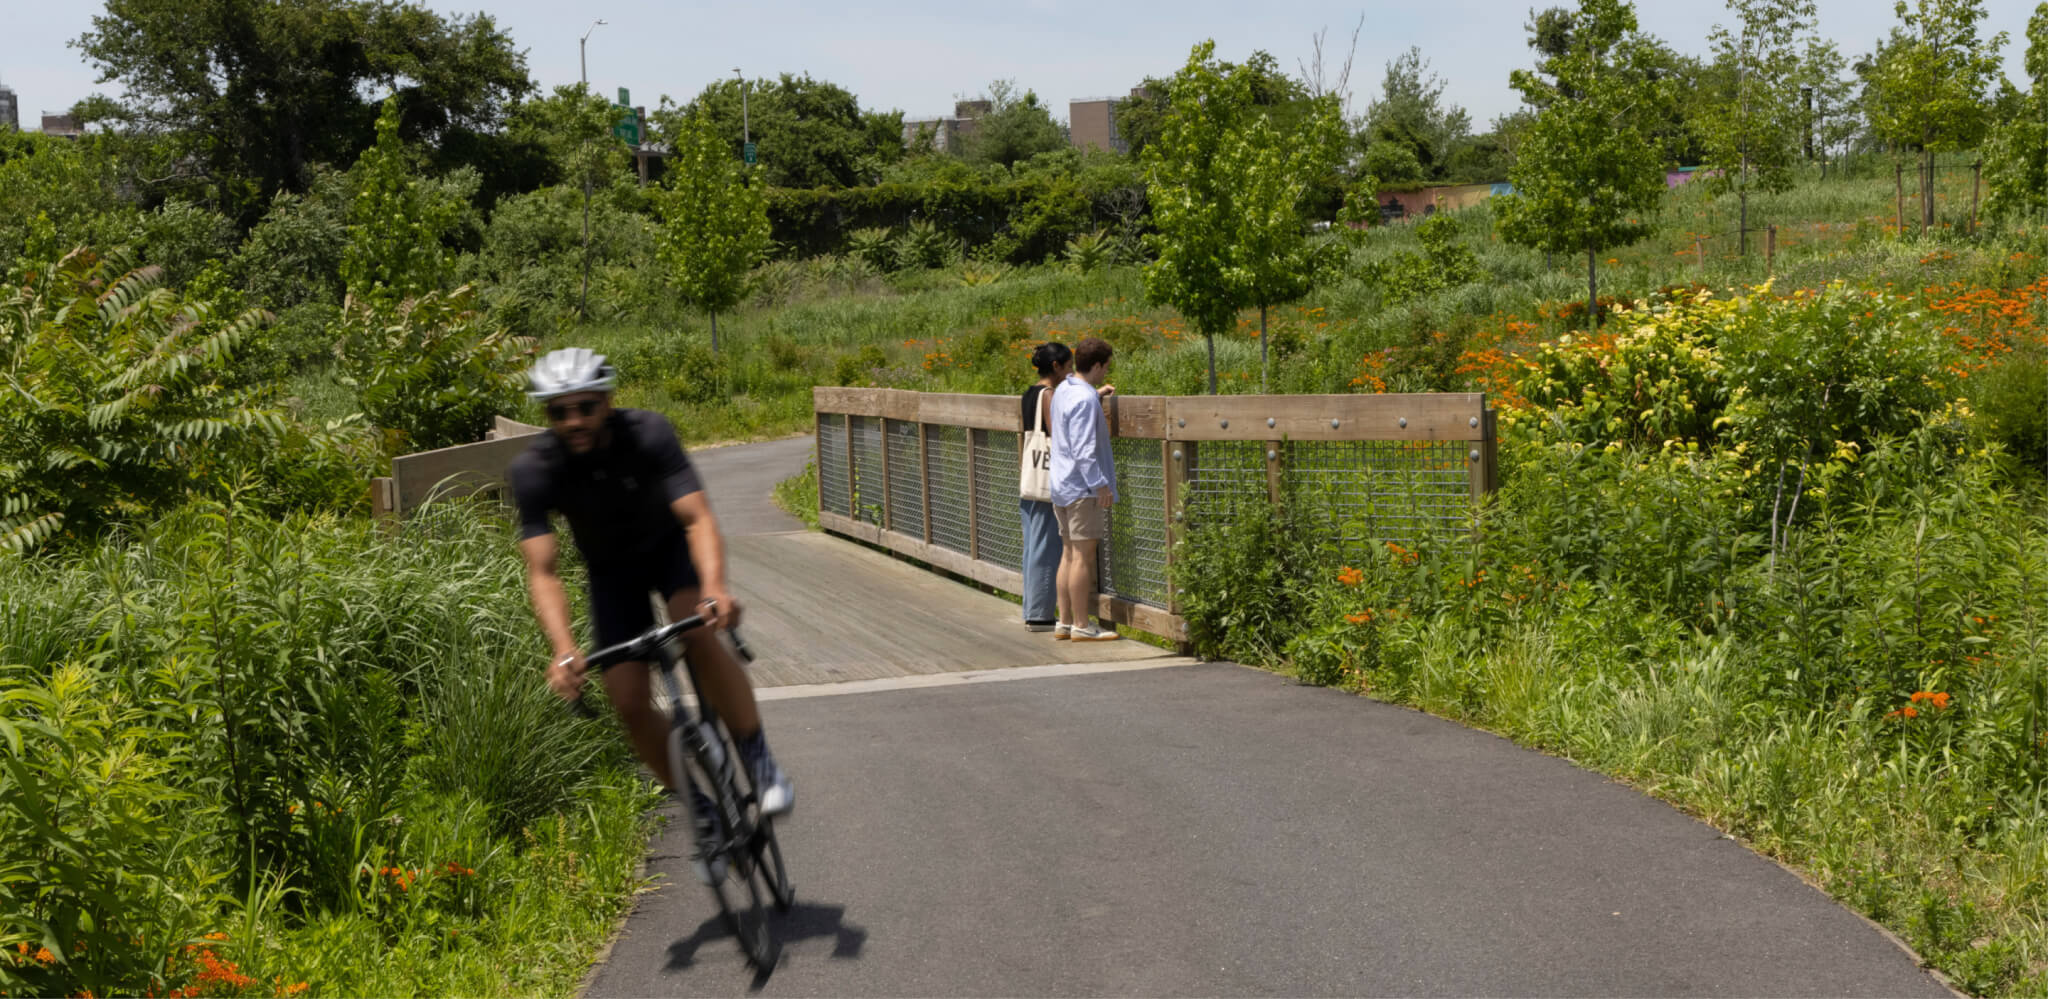 cyclists and pedestrians move along a wildlife trail in brooklyn